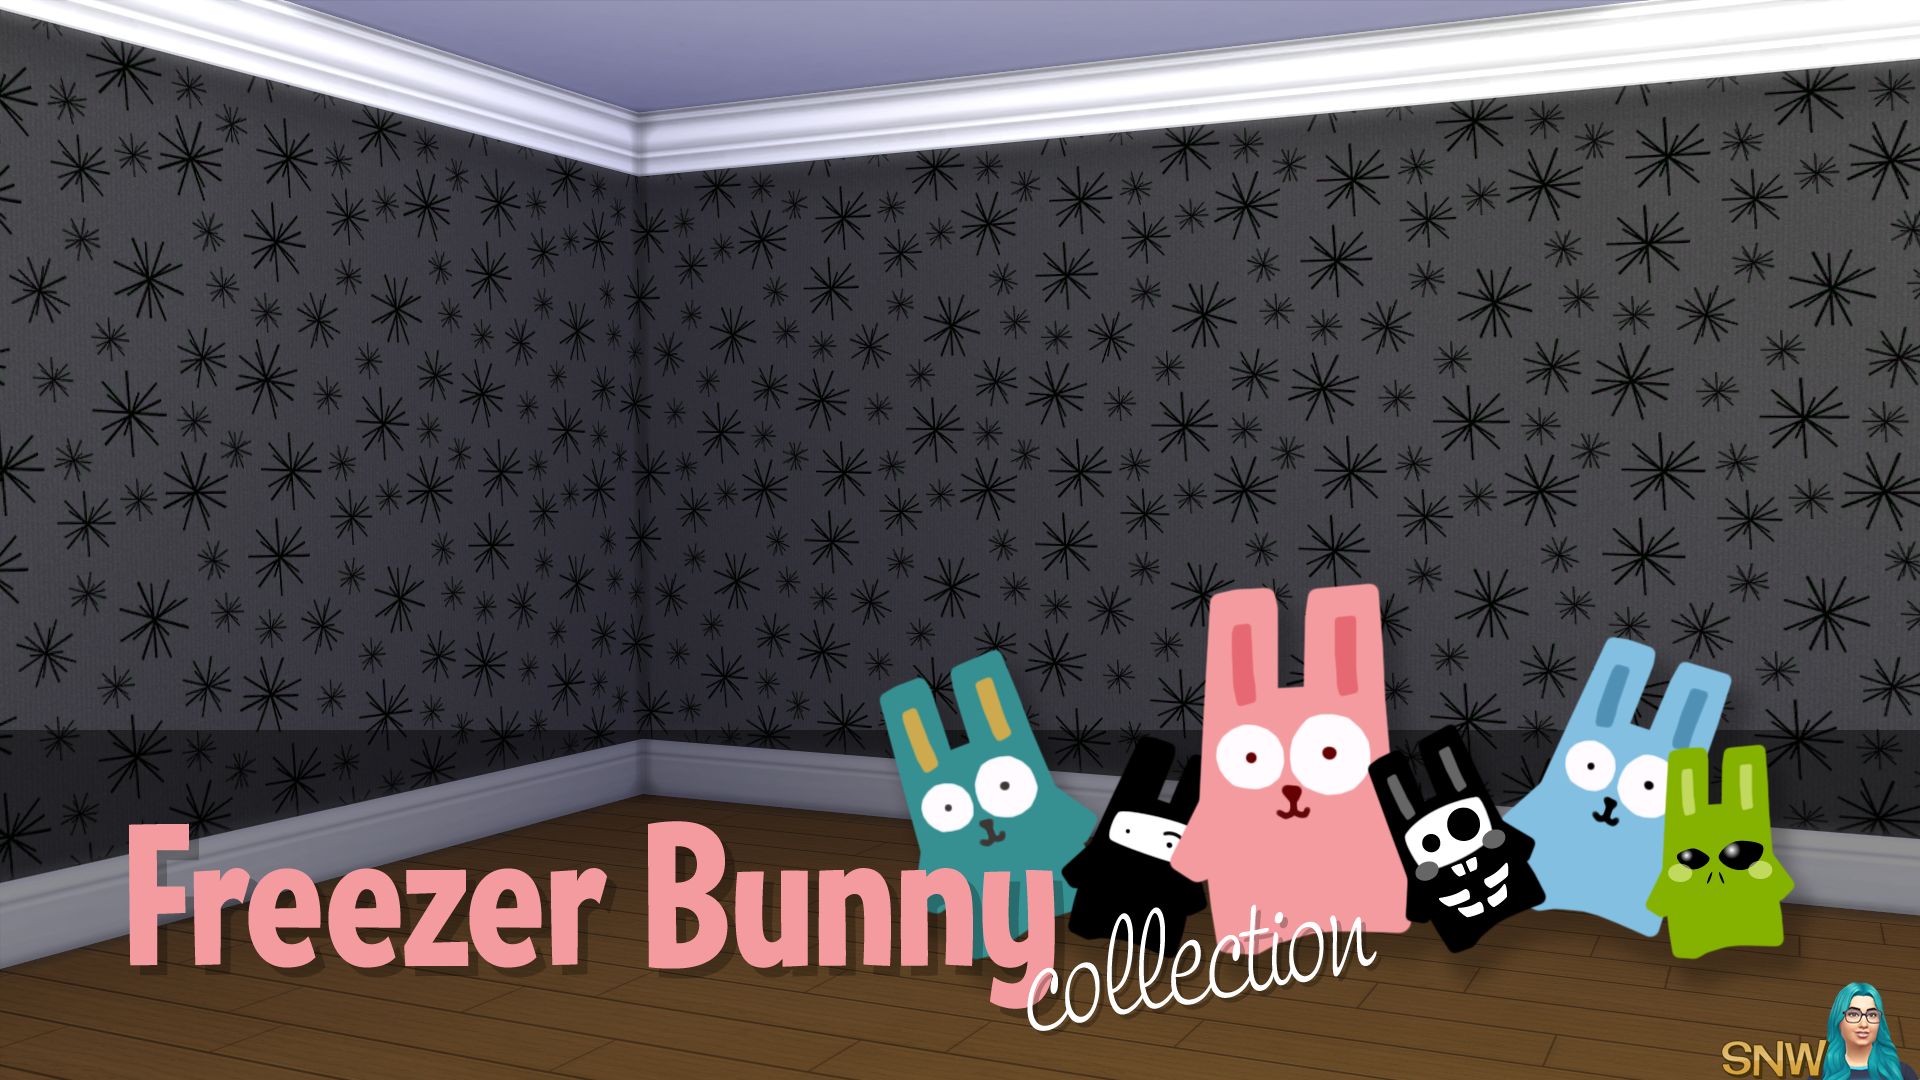 Freezer Bunny Collection: Starburst Wallpapers